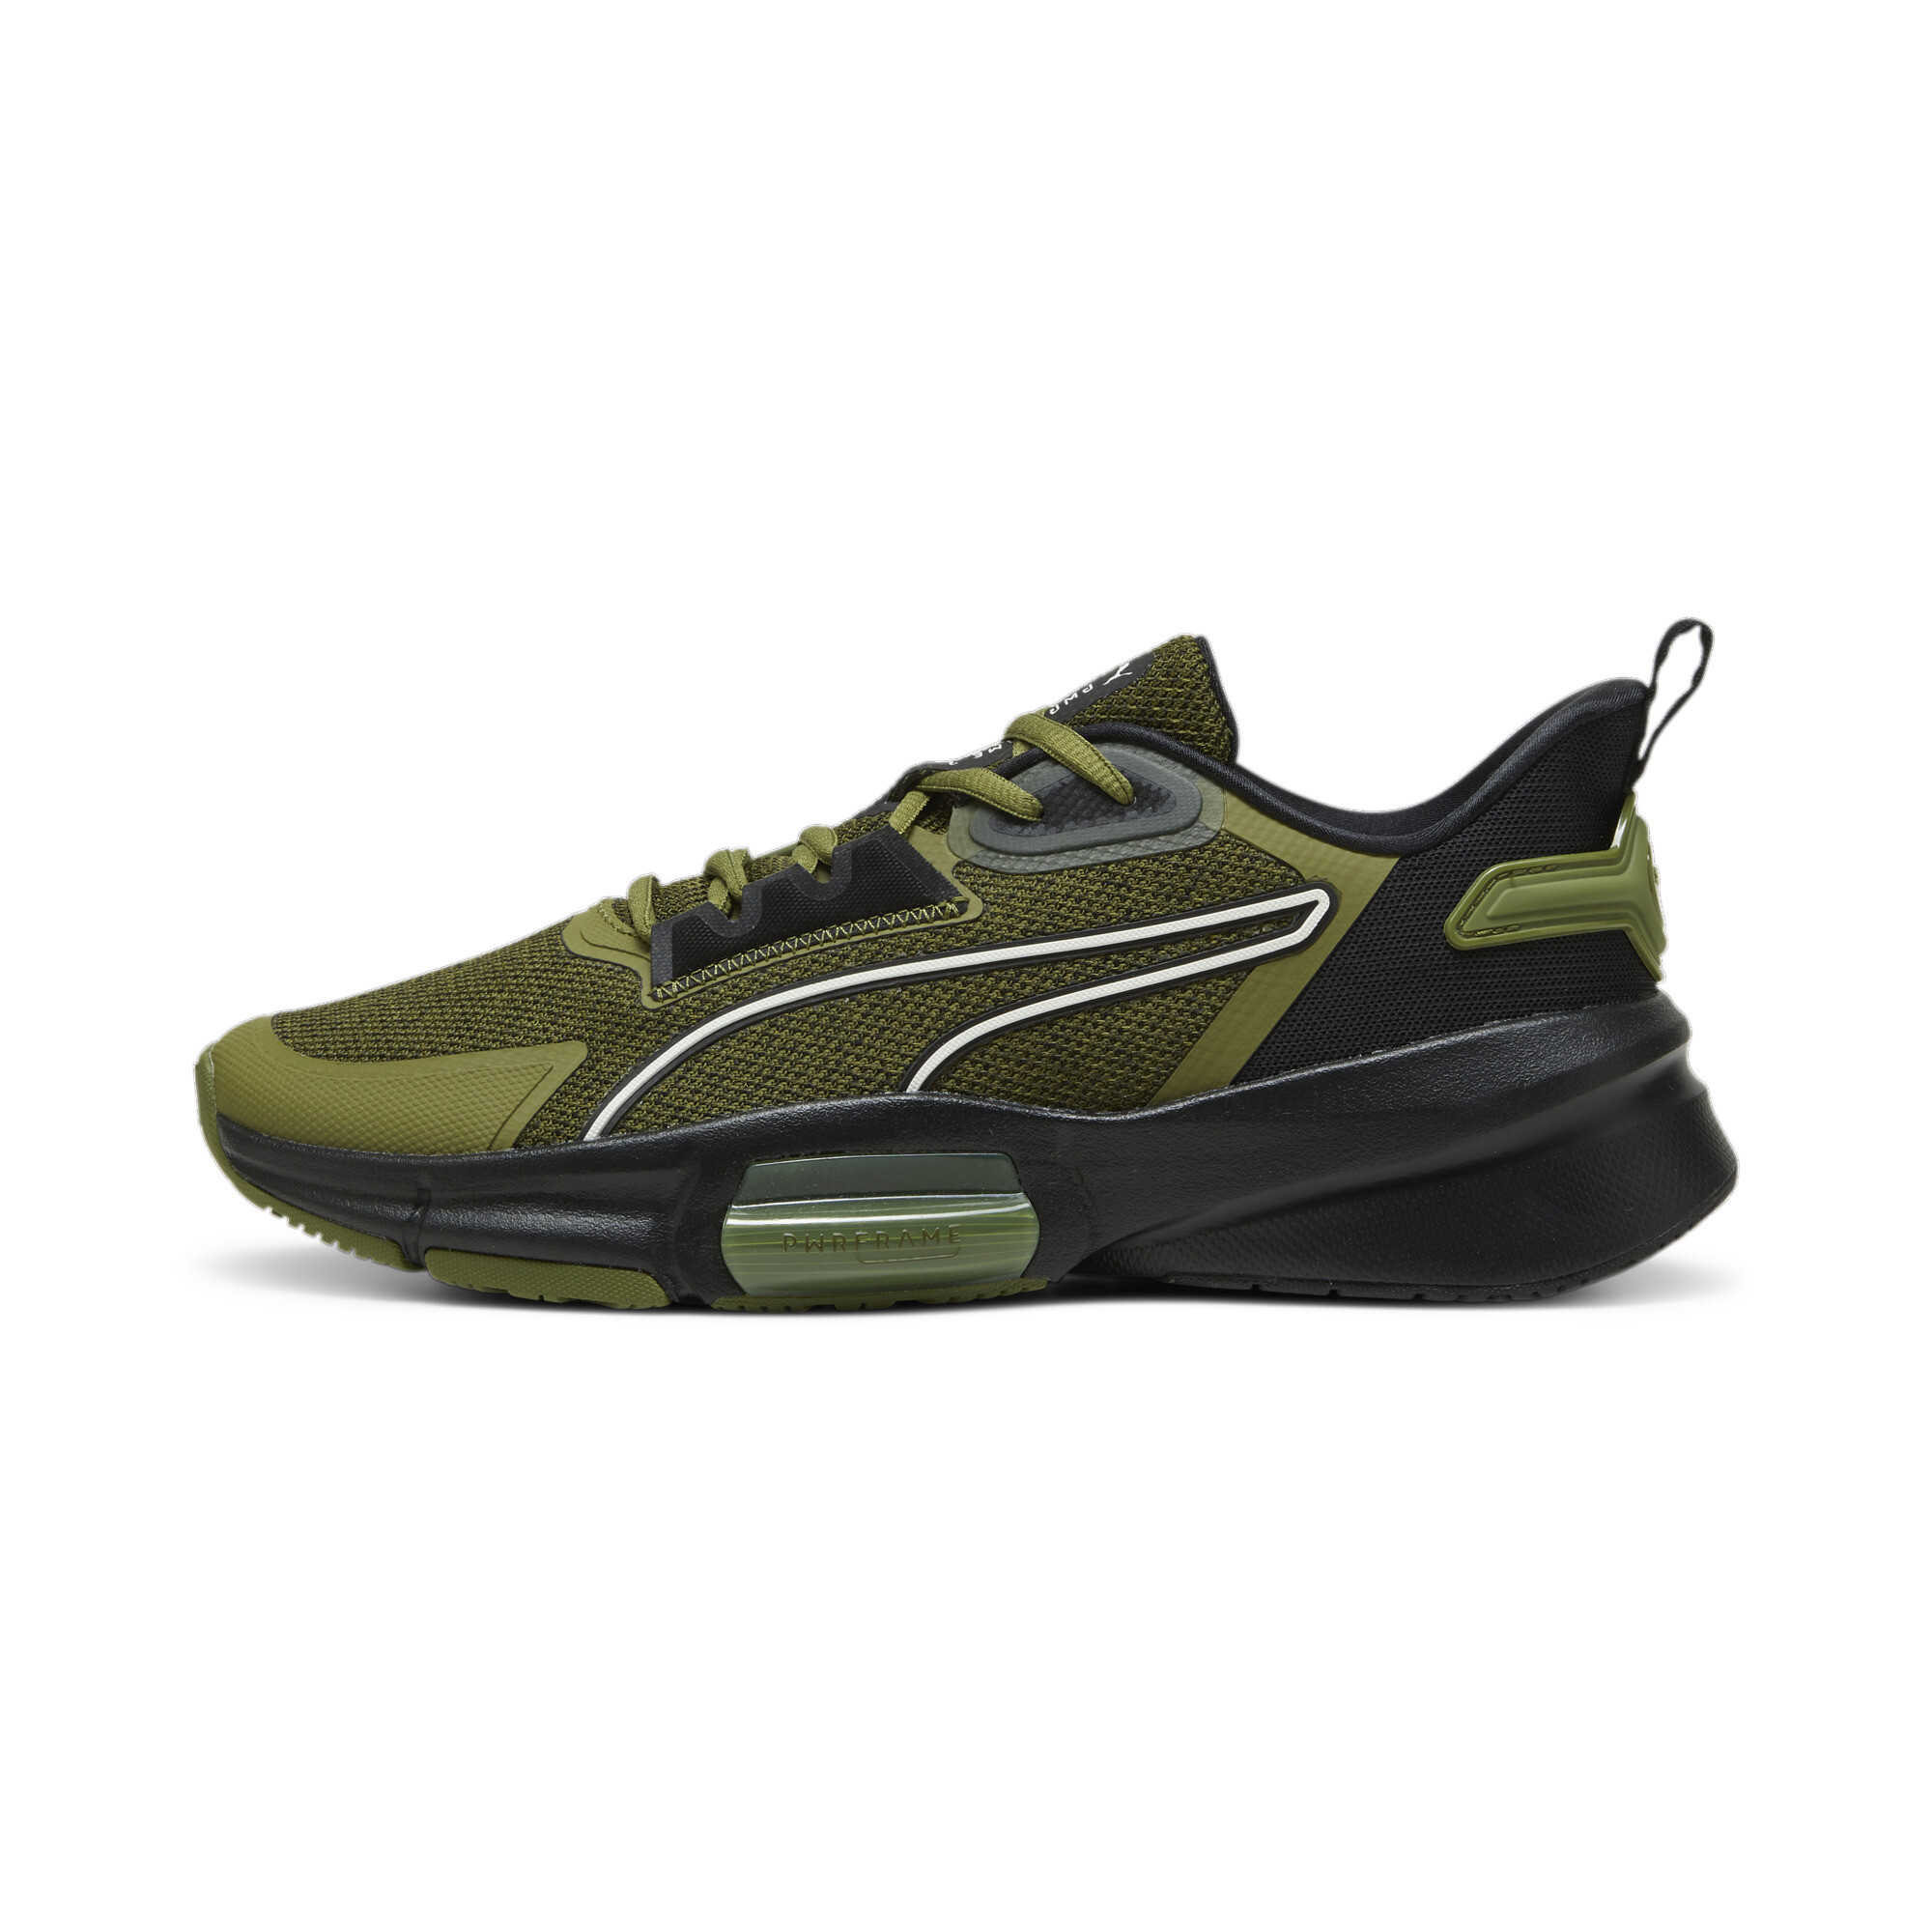 Men's PUMA PWRFrame TR 3 Neo Force Training Shoes In 40 - Green, Size EU 40.5